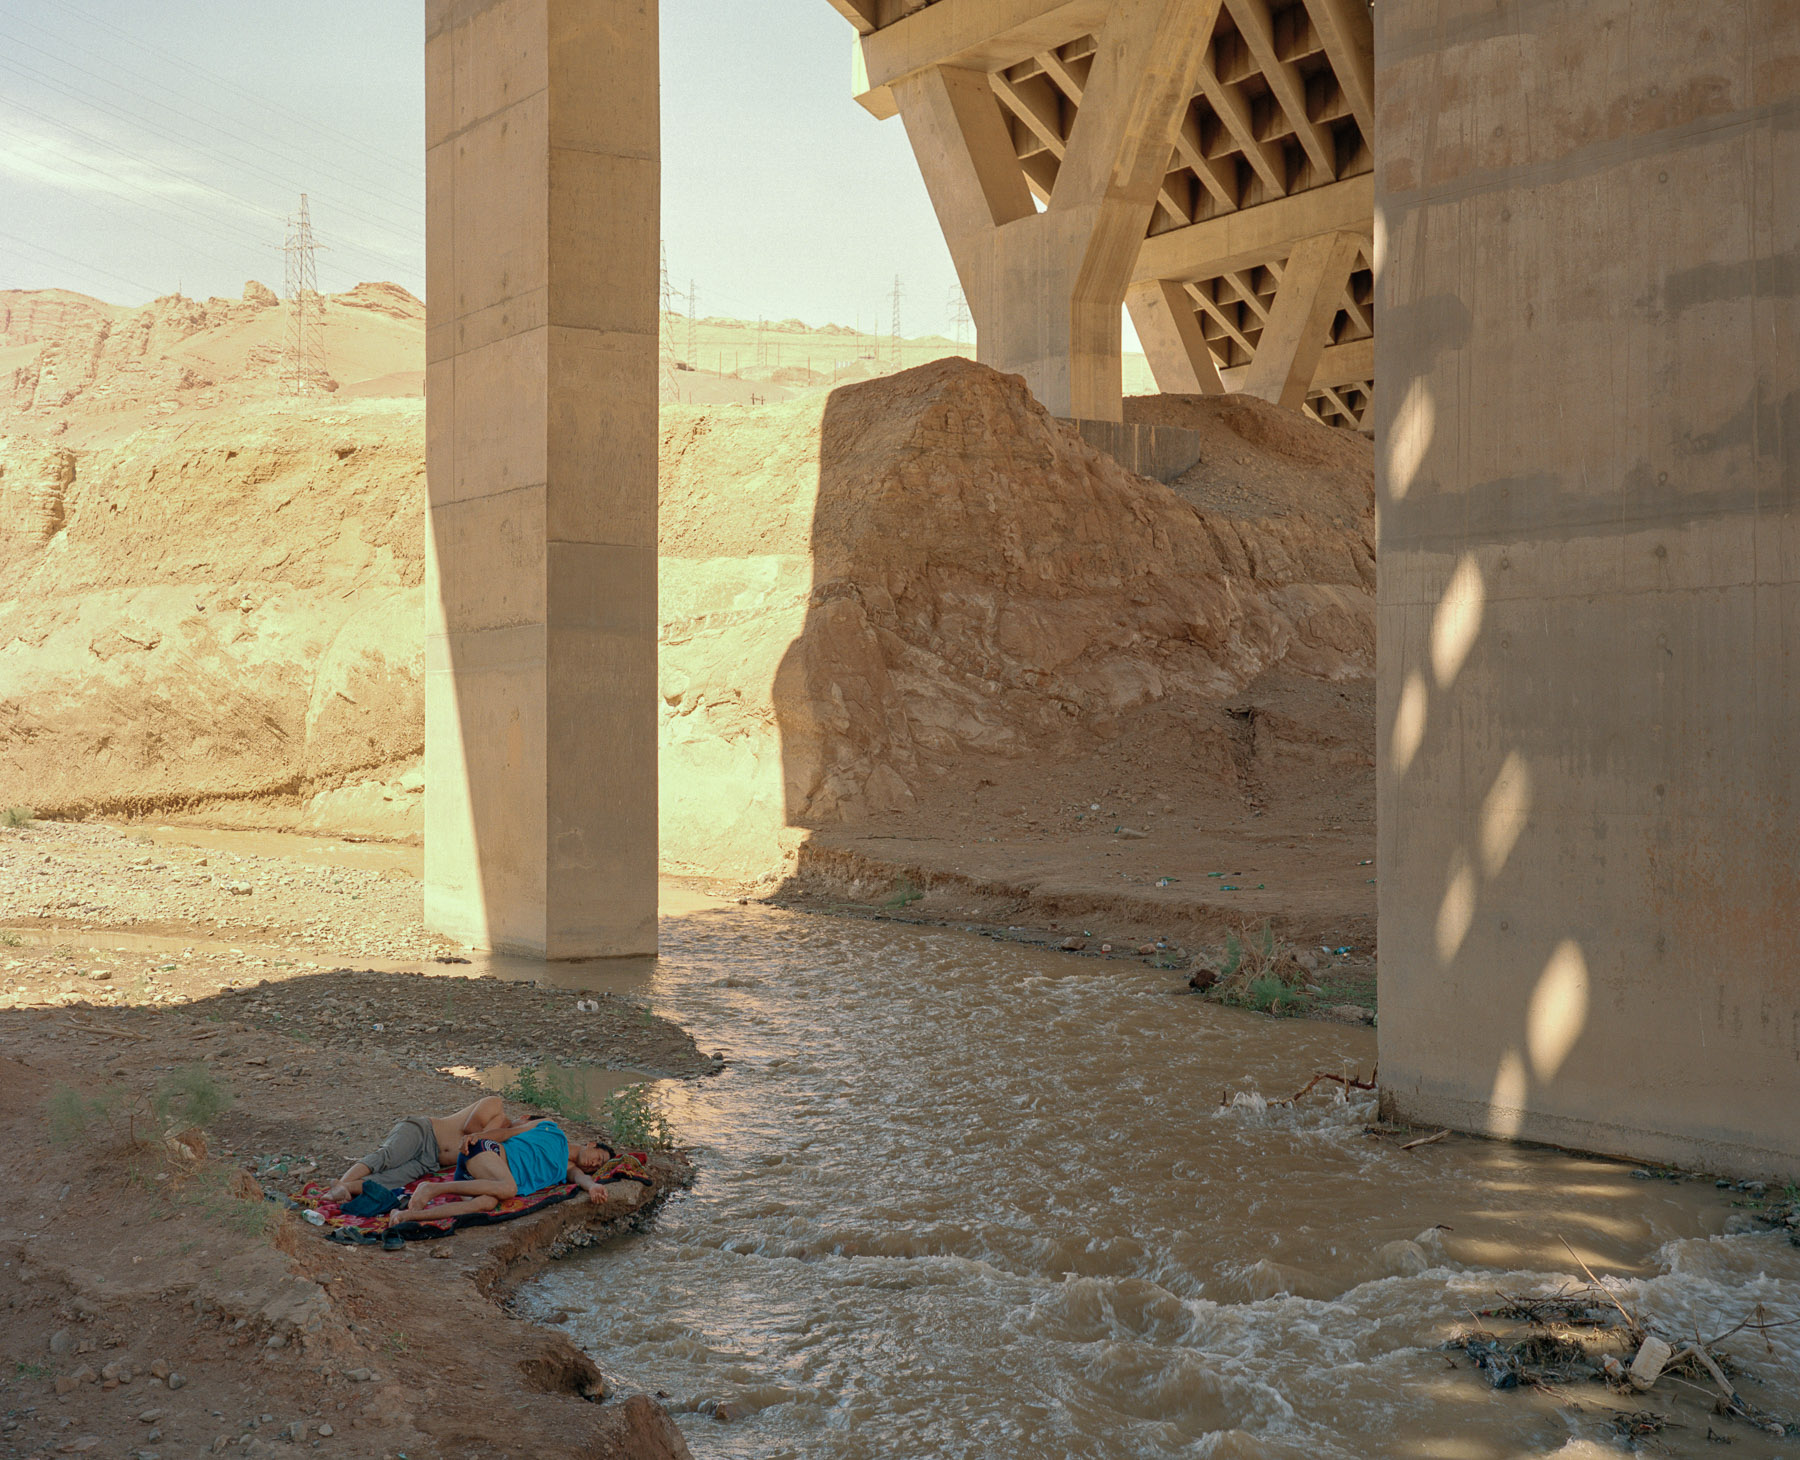  June 2016. Xinjiang province, China. On the road back from Turpan, a mostly Uighur oasis town, to Urumqi, Xinjiang's capital, we stop for a rest and see these two young Uighur men taking a nap under a bridge while the summer heat is reaching its pea